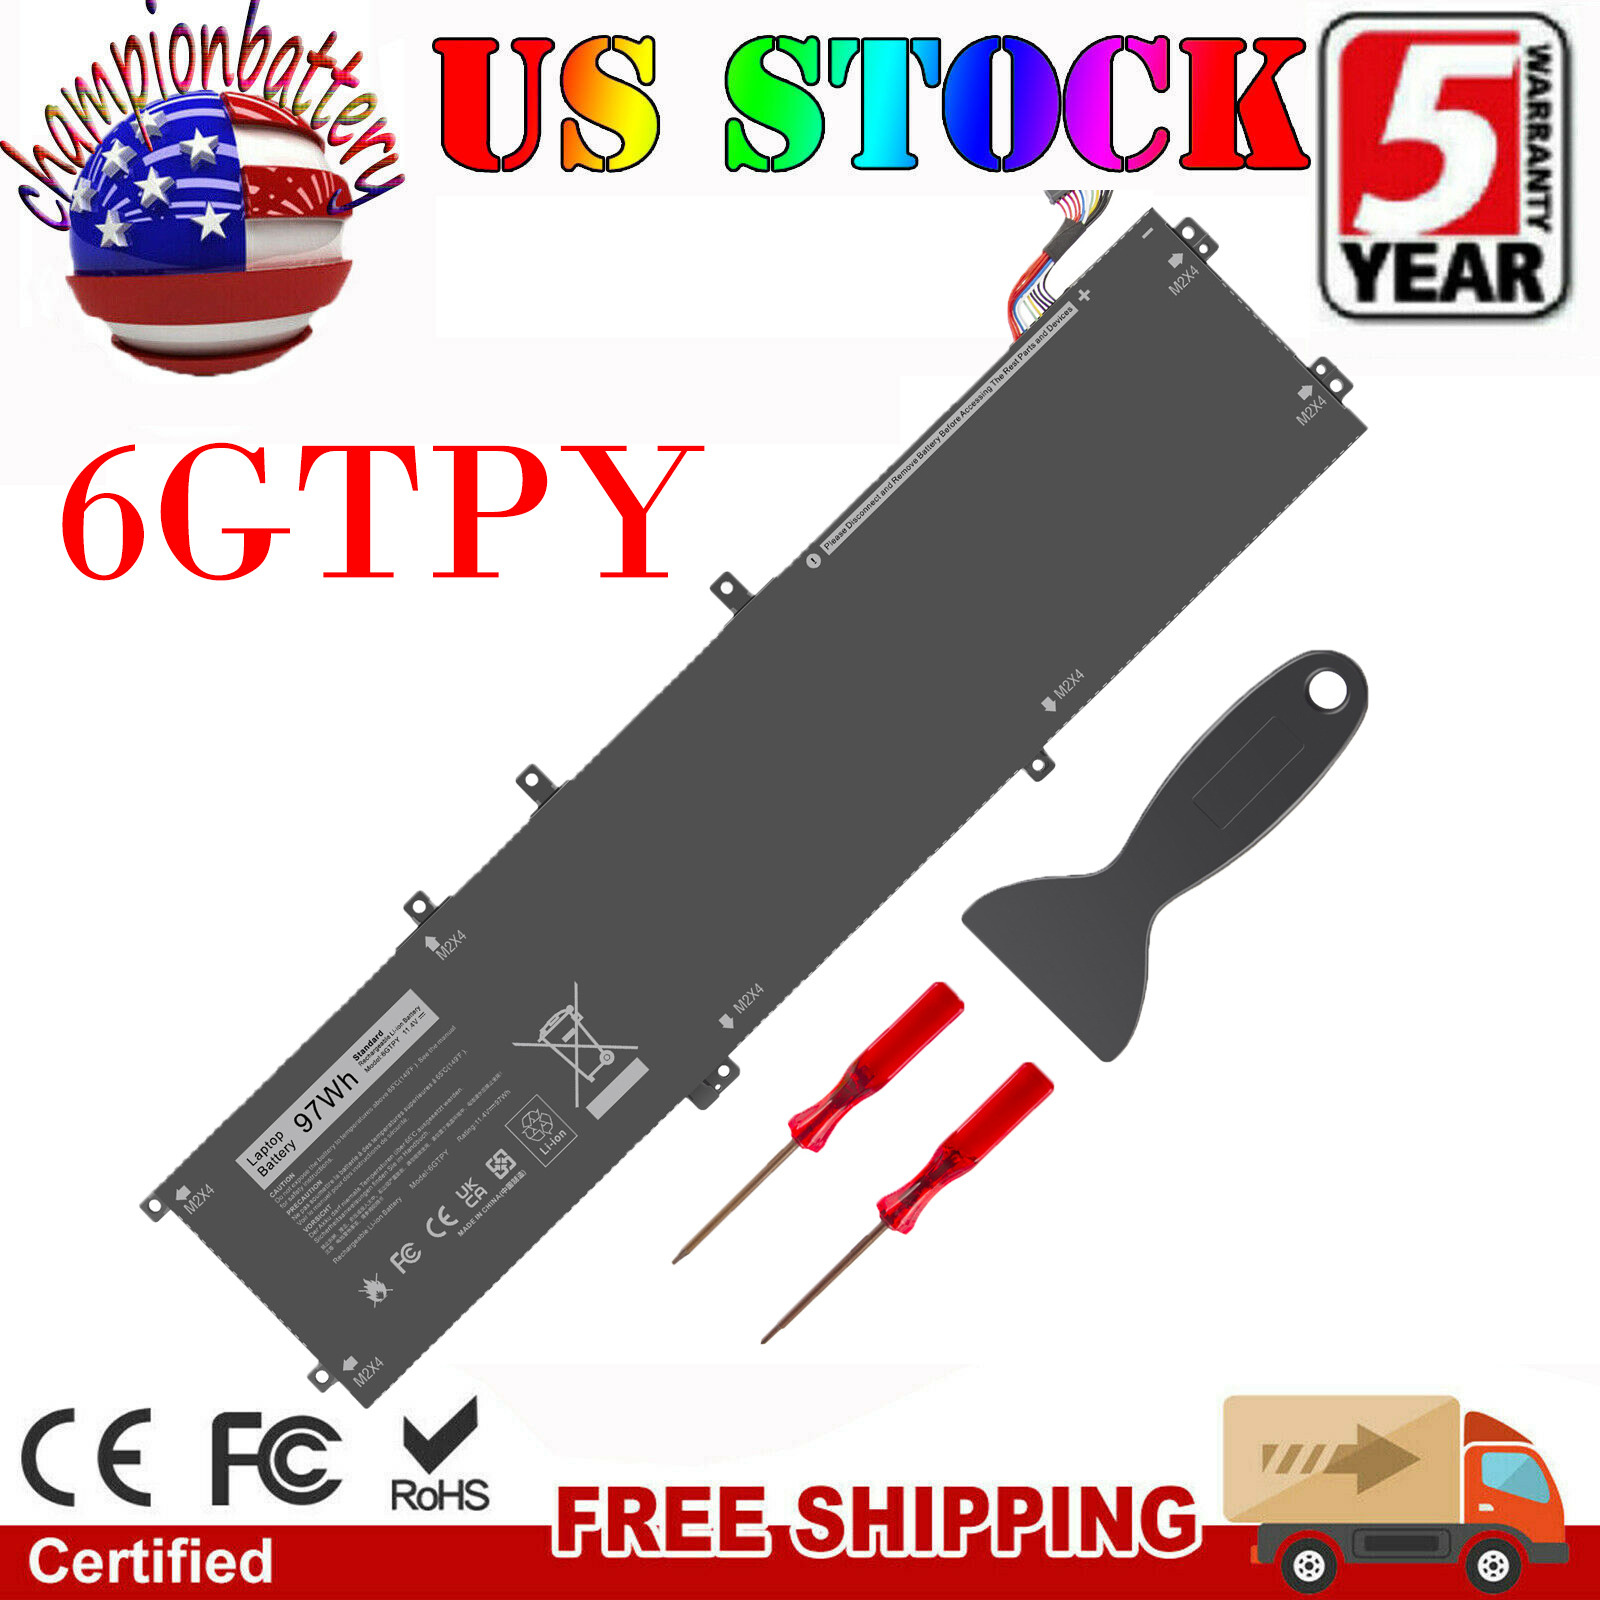 6GTPY Battery for Dell Precision 5510 5520 5530 XPS 15 9570 9560 9550 7590 M5520